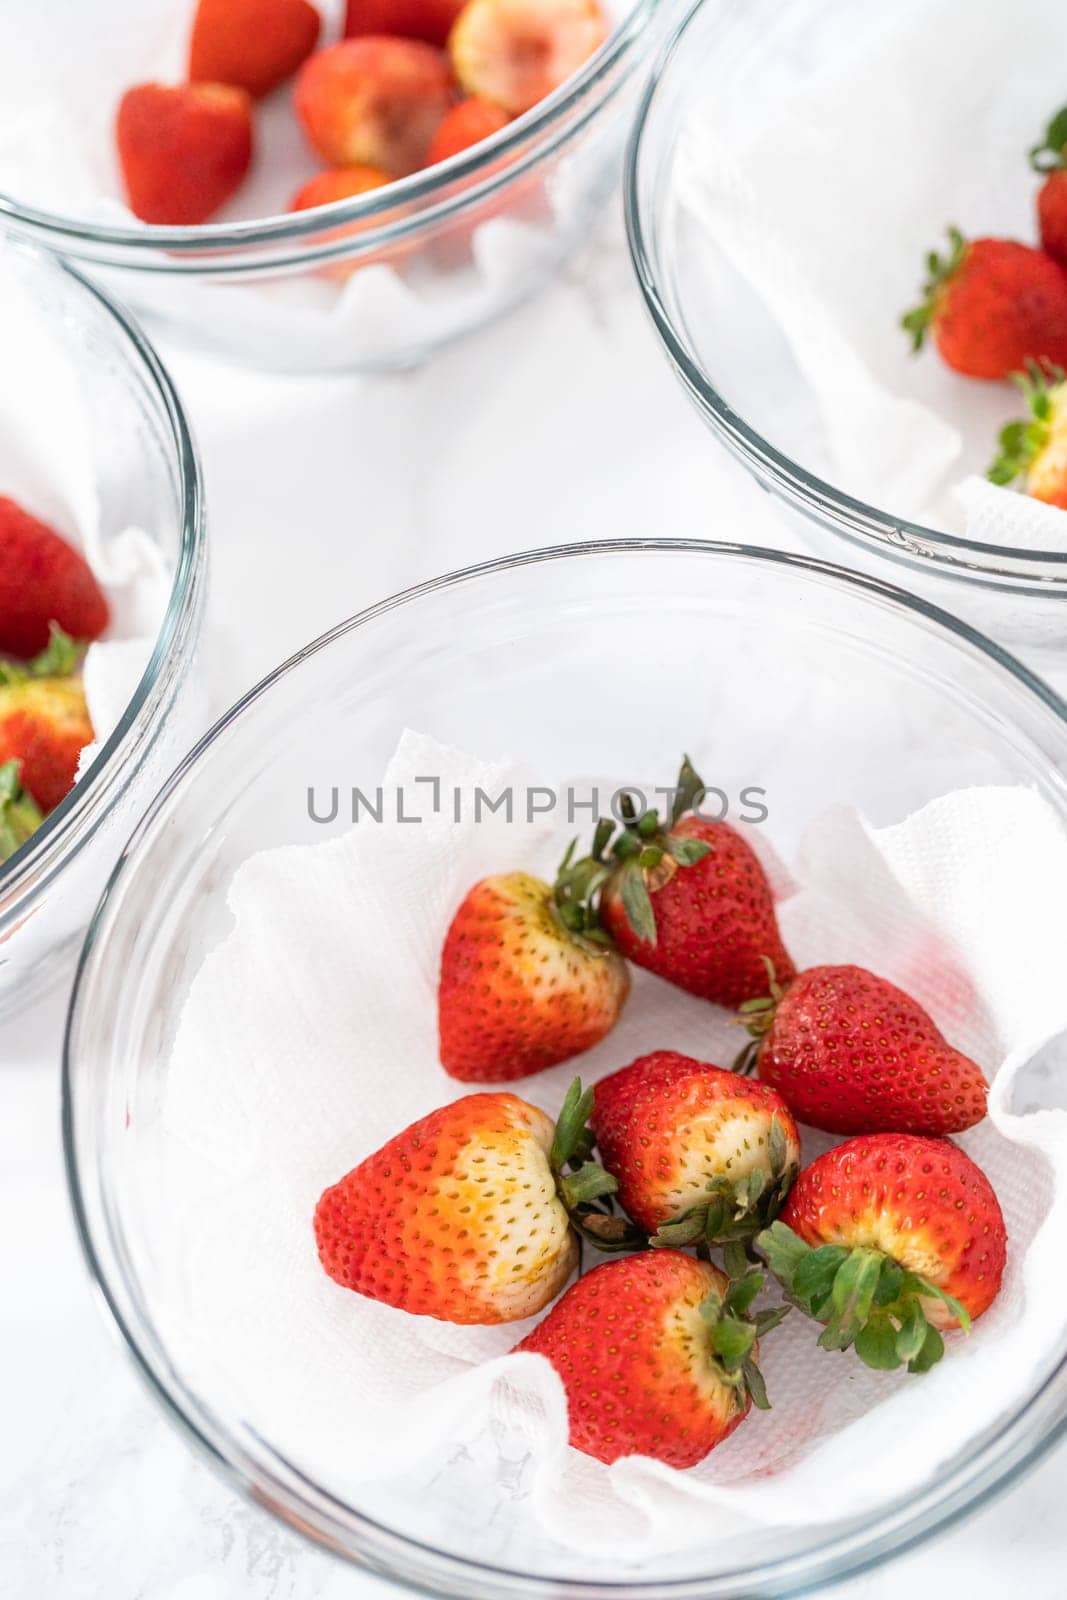 Fresh and Moldy Strawberries in a Glass Bowl on a White Napkin by arinahabich